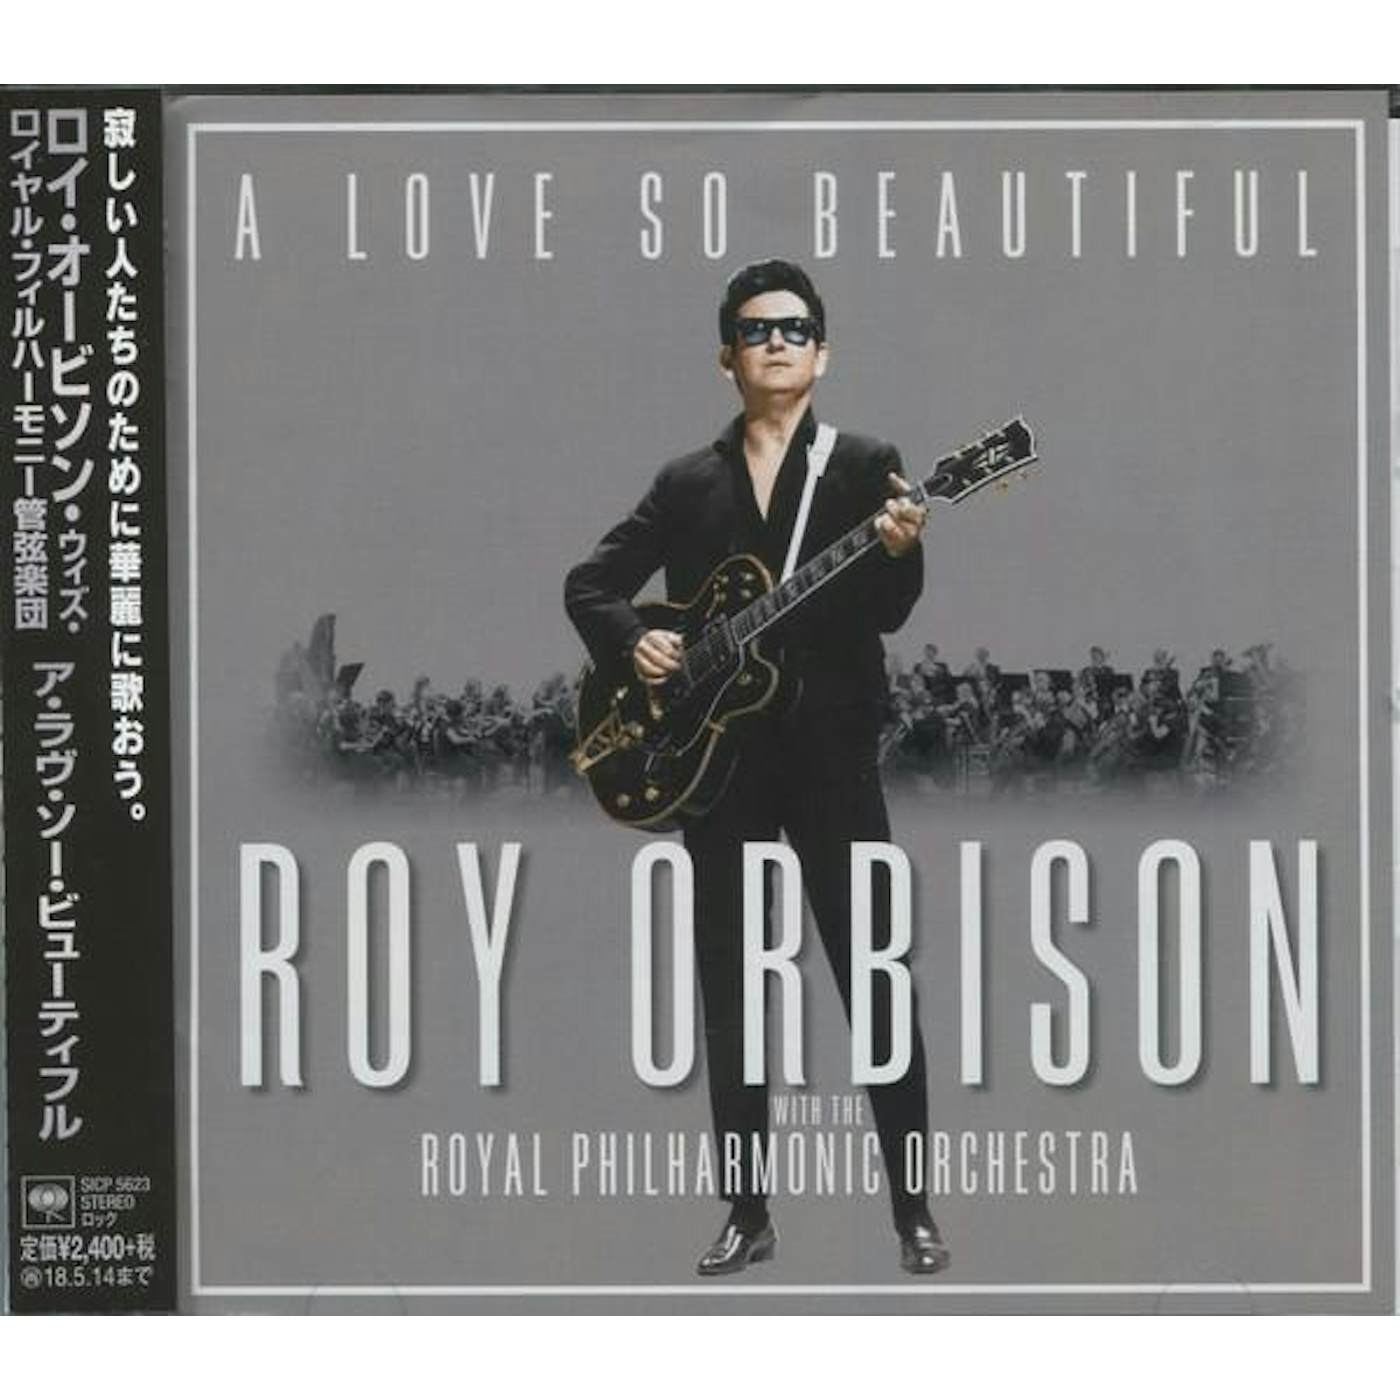 Roy Orbison CD - A Love So Beautiful - Roy Orbison & The